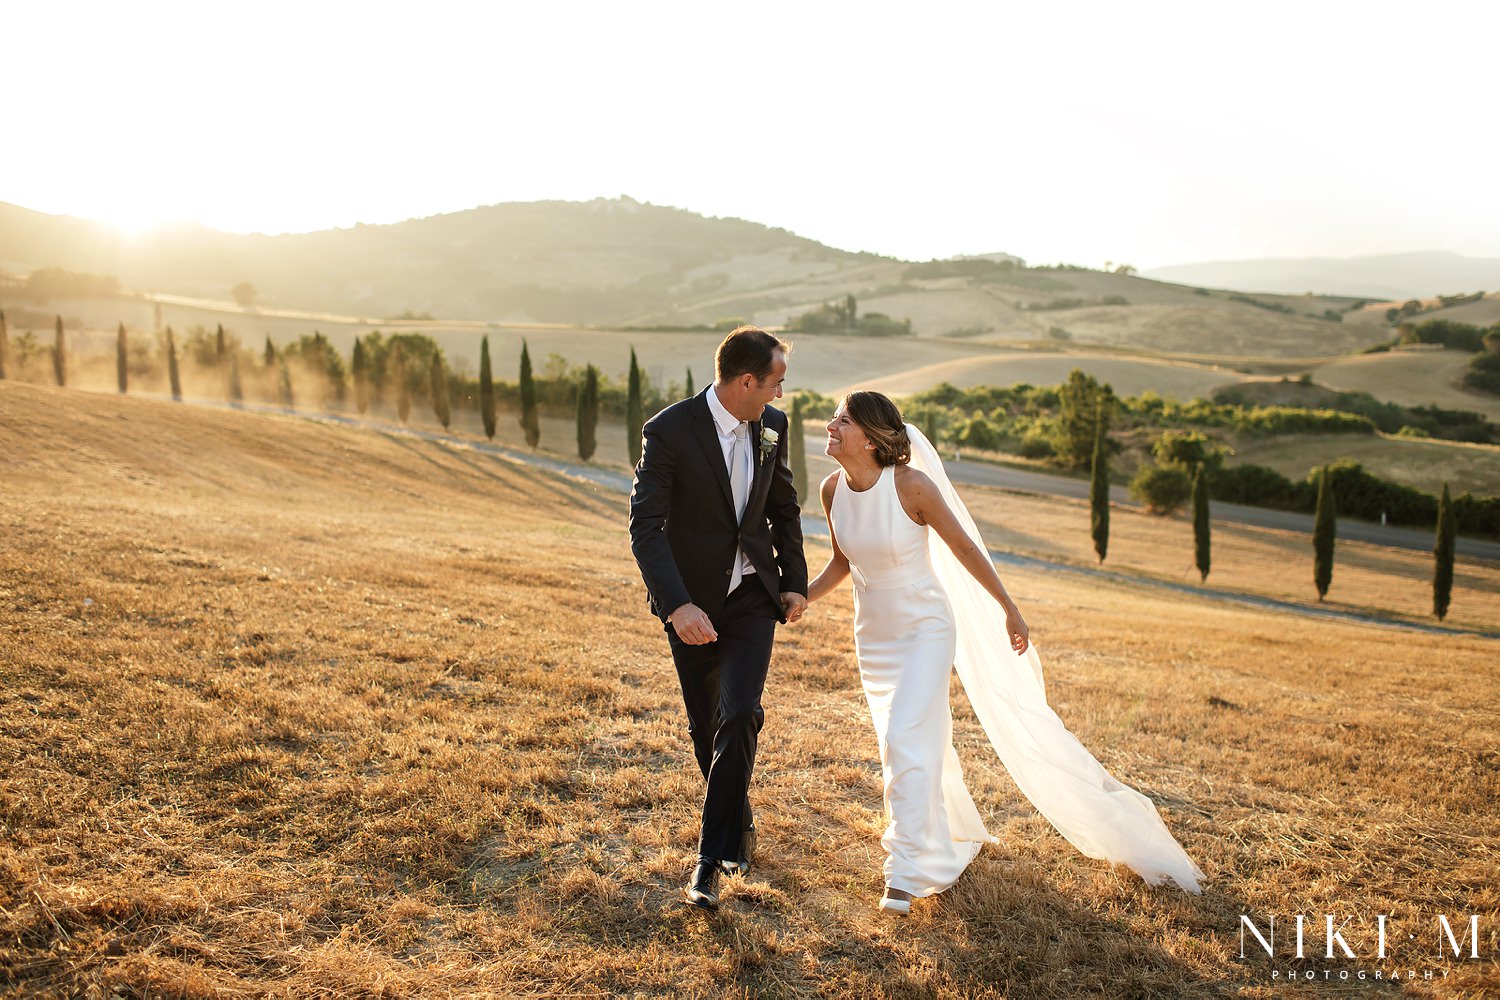 Perfect Tuscany wedding venue with rolling hills and cypress trees